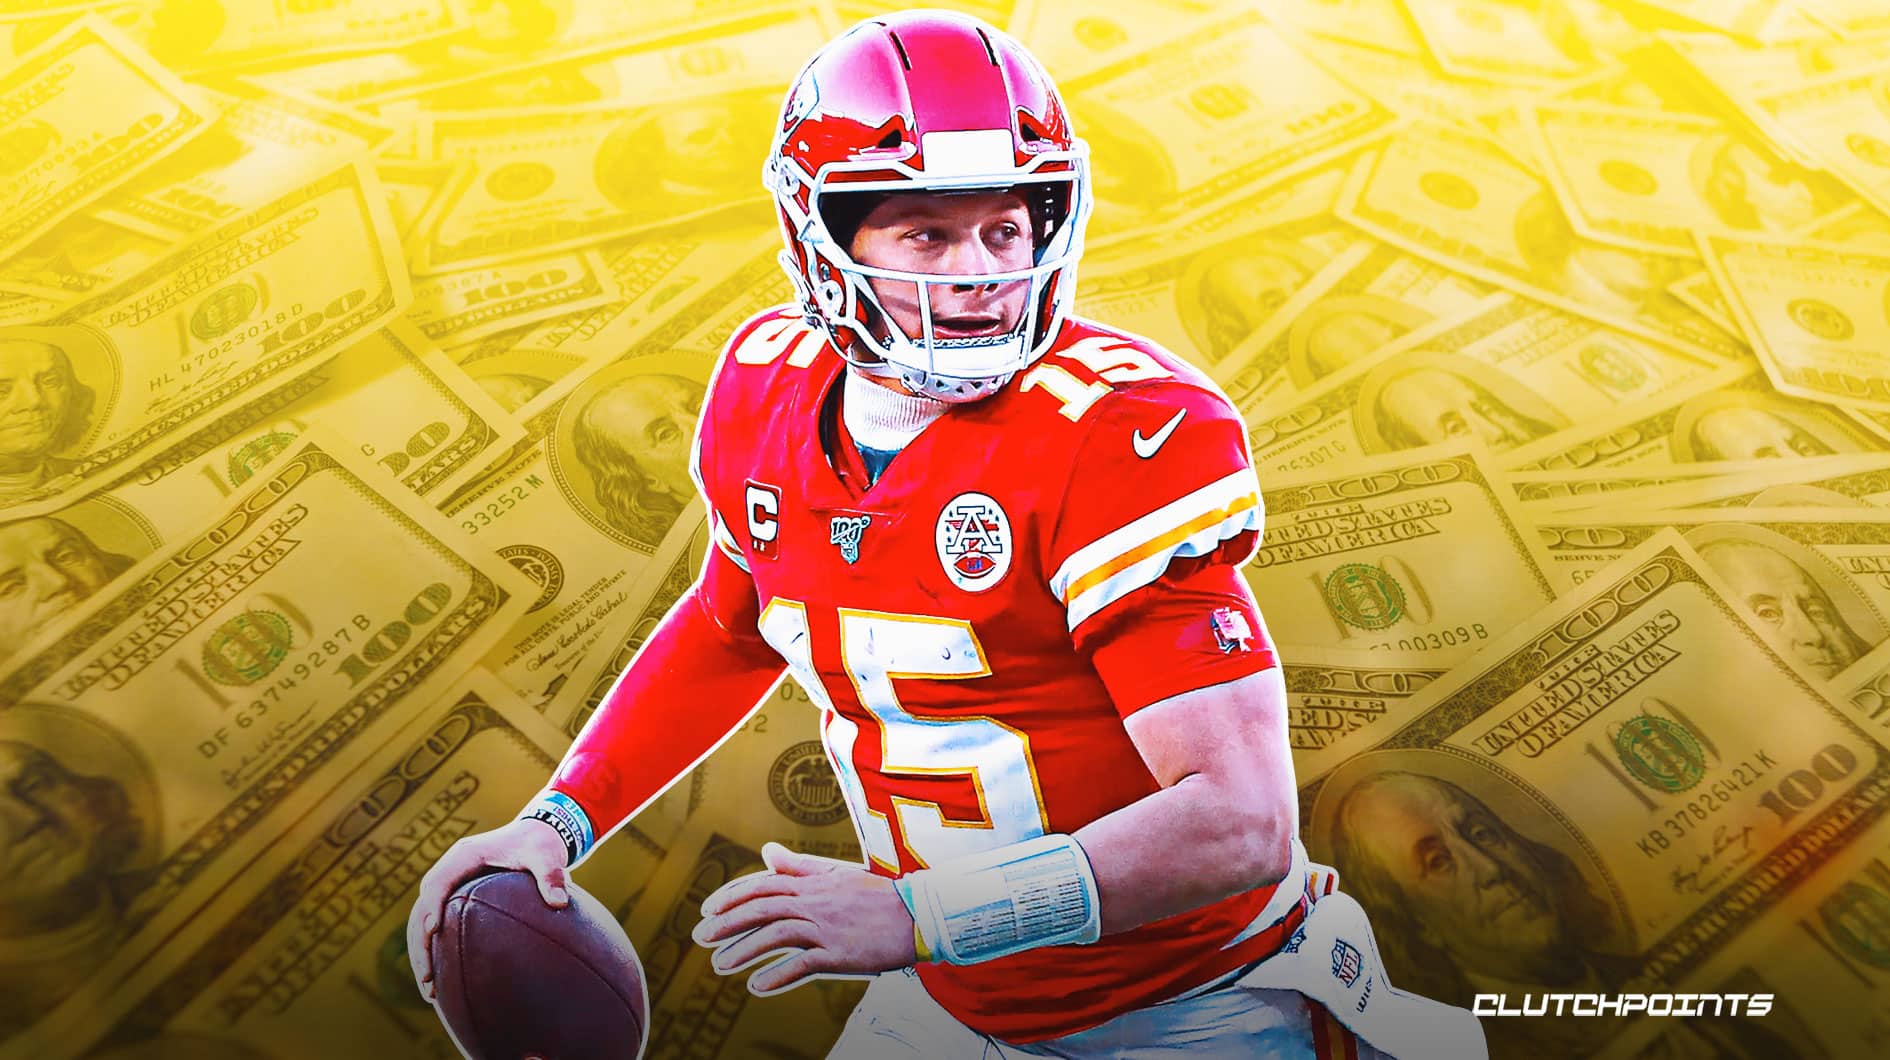 Patrick Mahomes Is Investing in F1—Here's His Net Worth